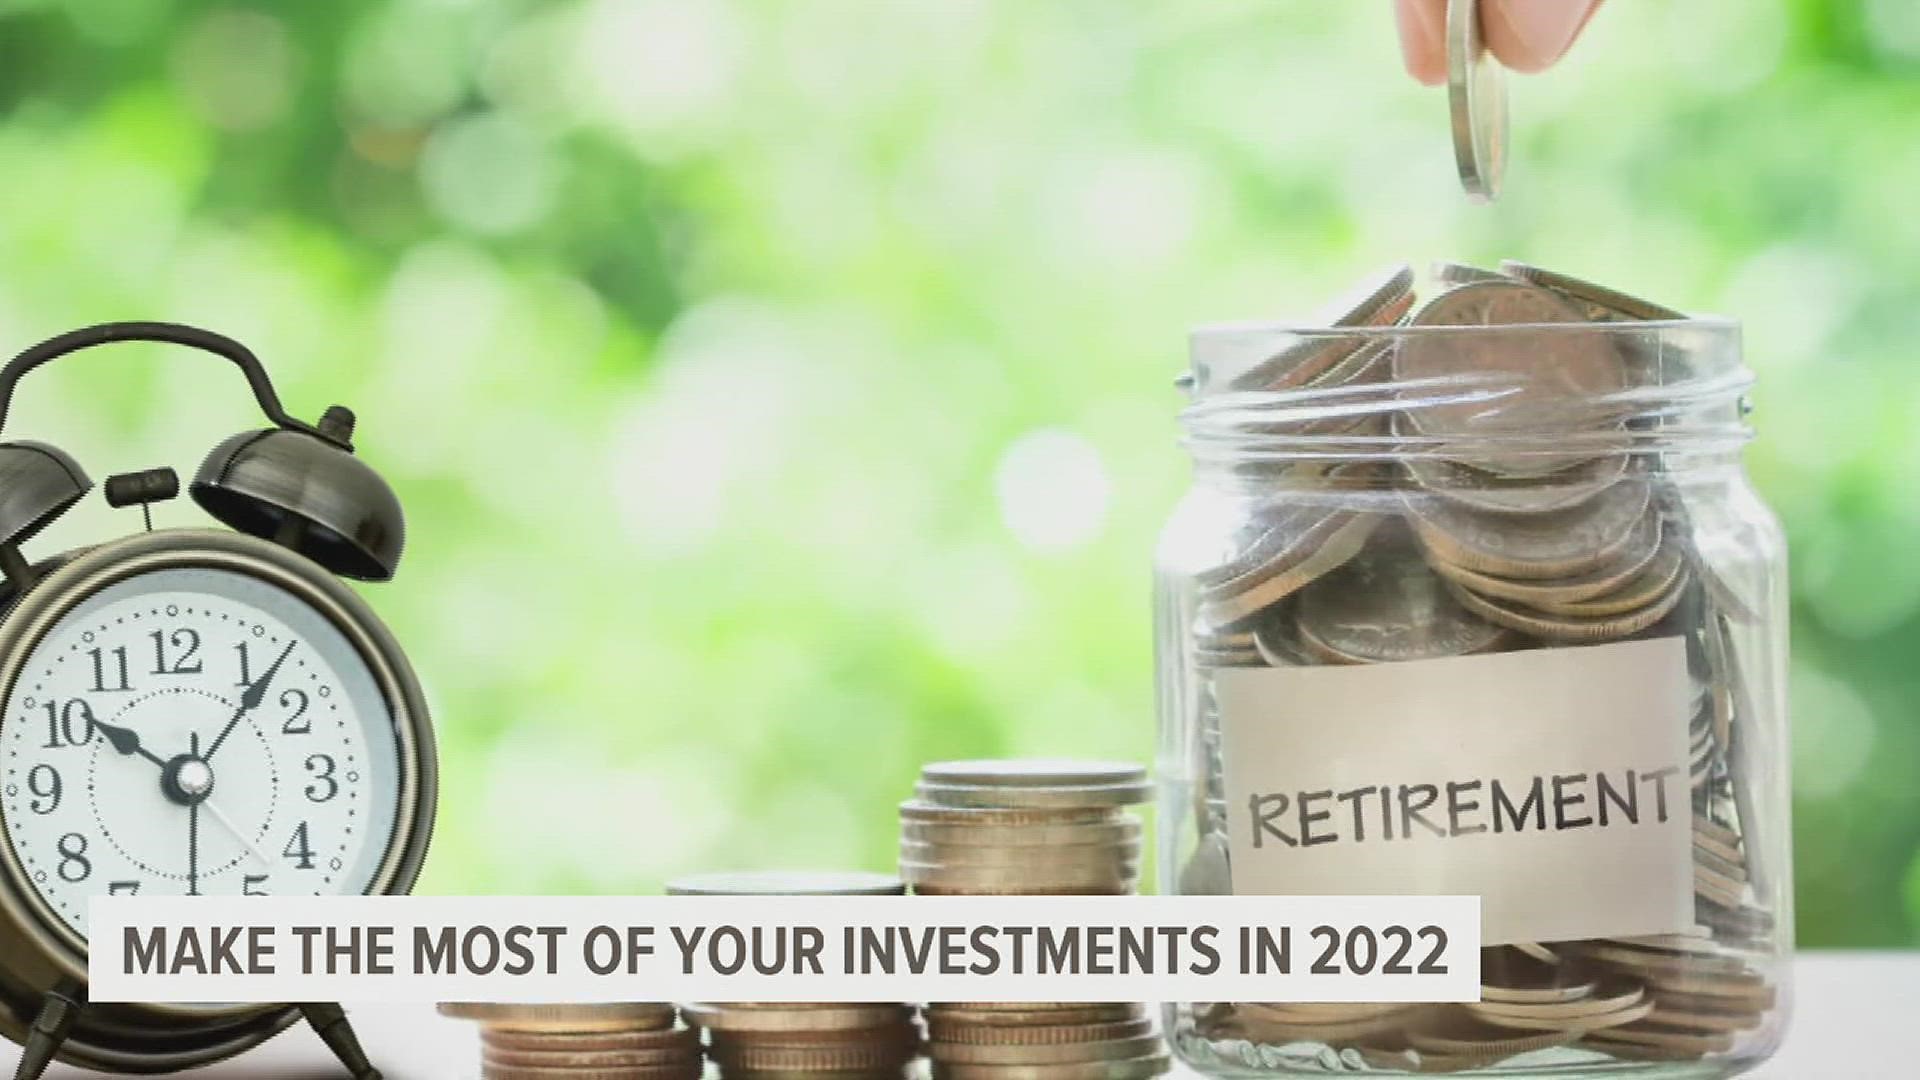 After a year of market volatility, how can you make the most of your money? FOX43 spoke with an expert who offered some tips.